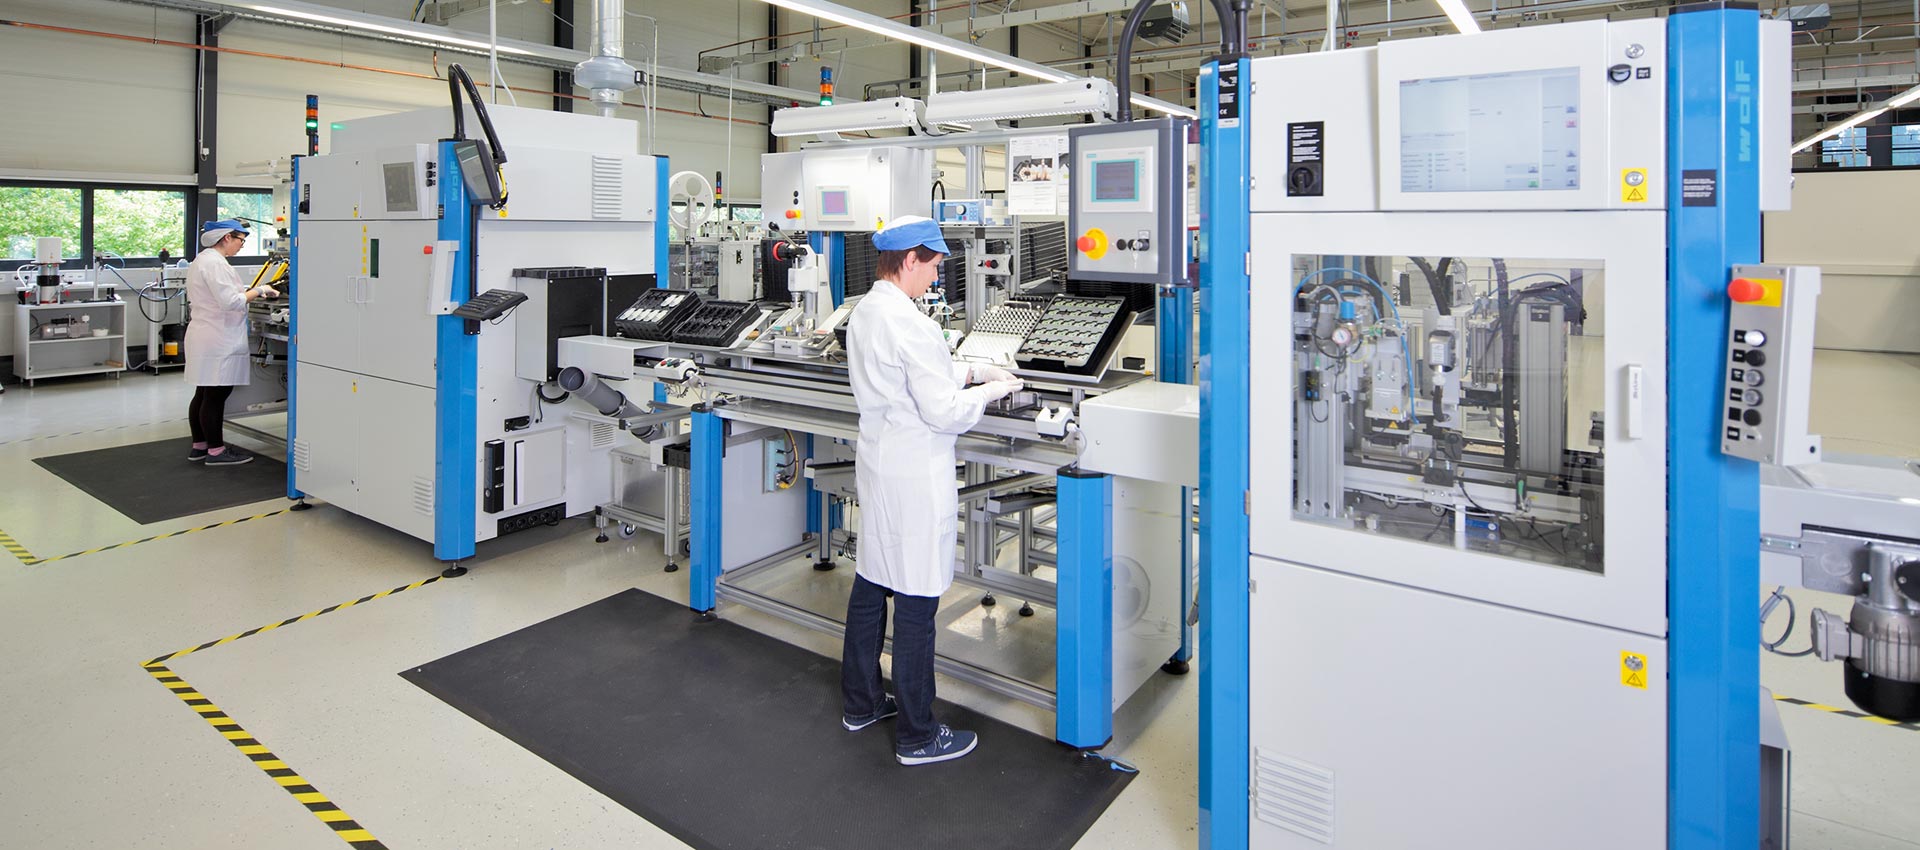 Semi-automatic assembly line for electronic modules. The following processes are integrated: Caulking, laser soldering, laser marking, laser welding, leak testing, greasing. Photo: PMDM